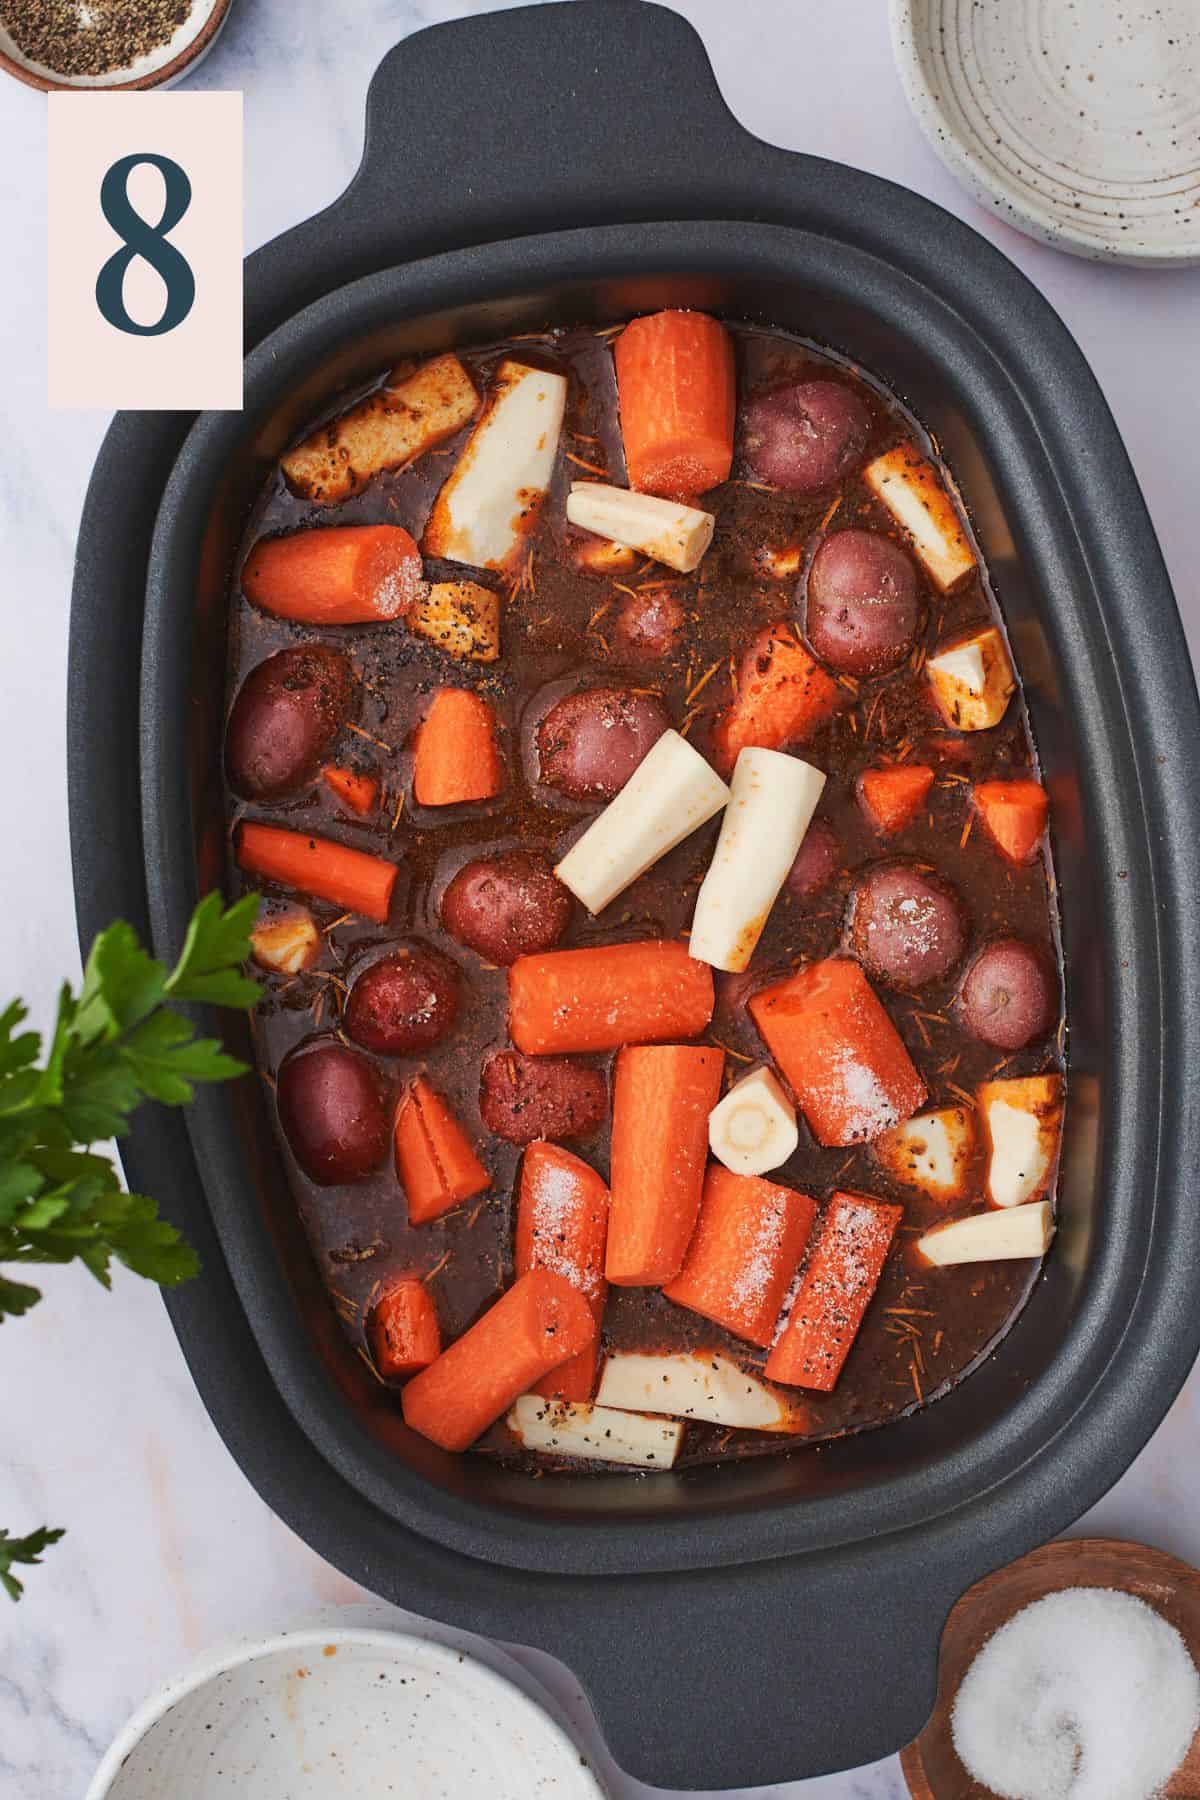 beef stock in a slow cooker with parsnips, carrots, and red potatoes.